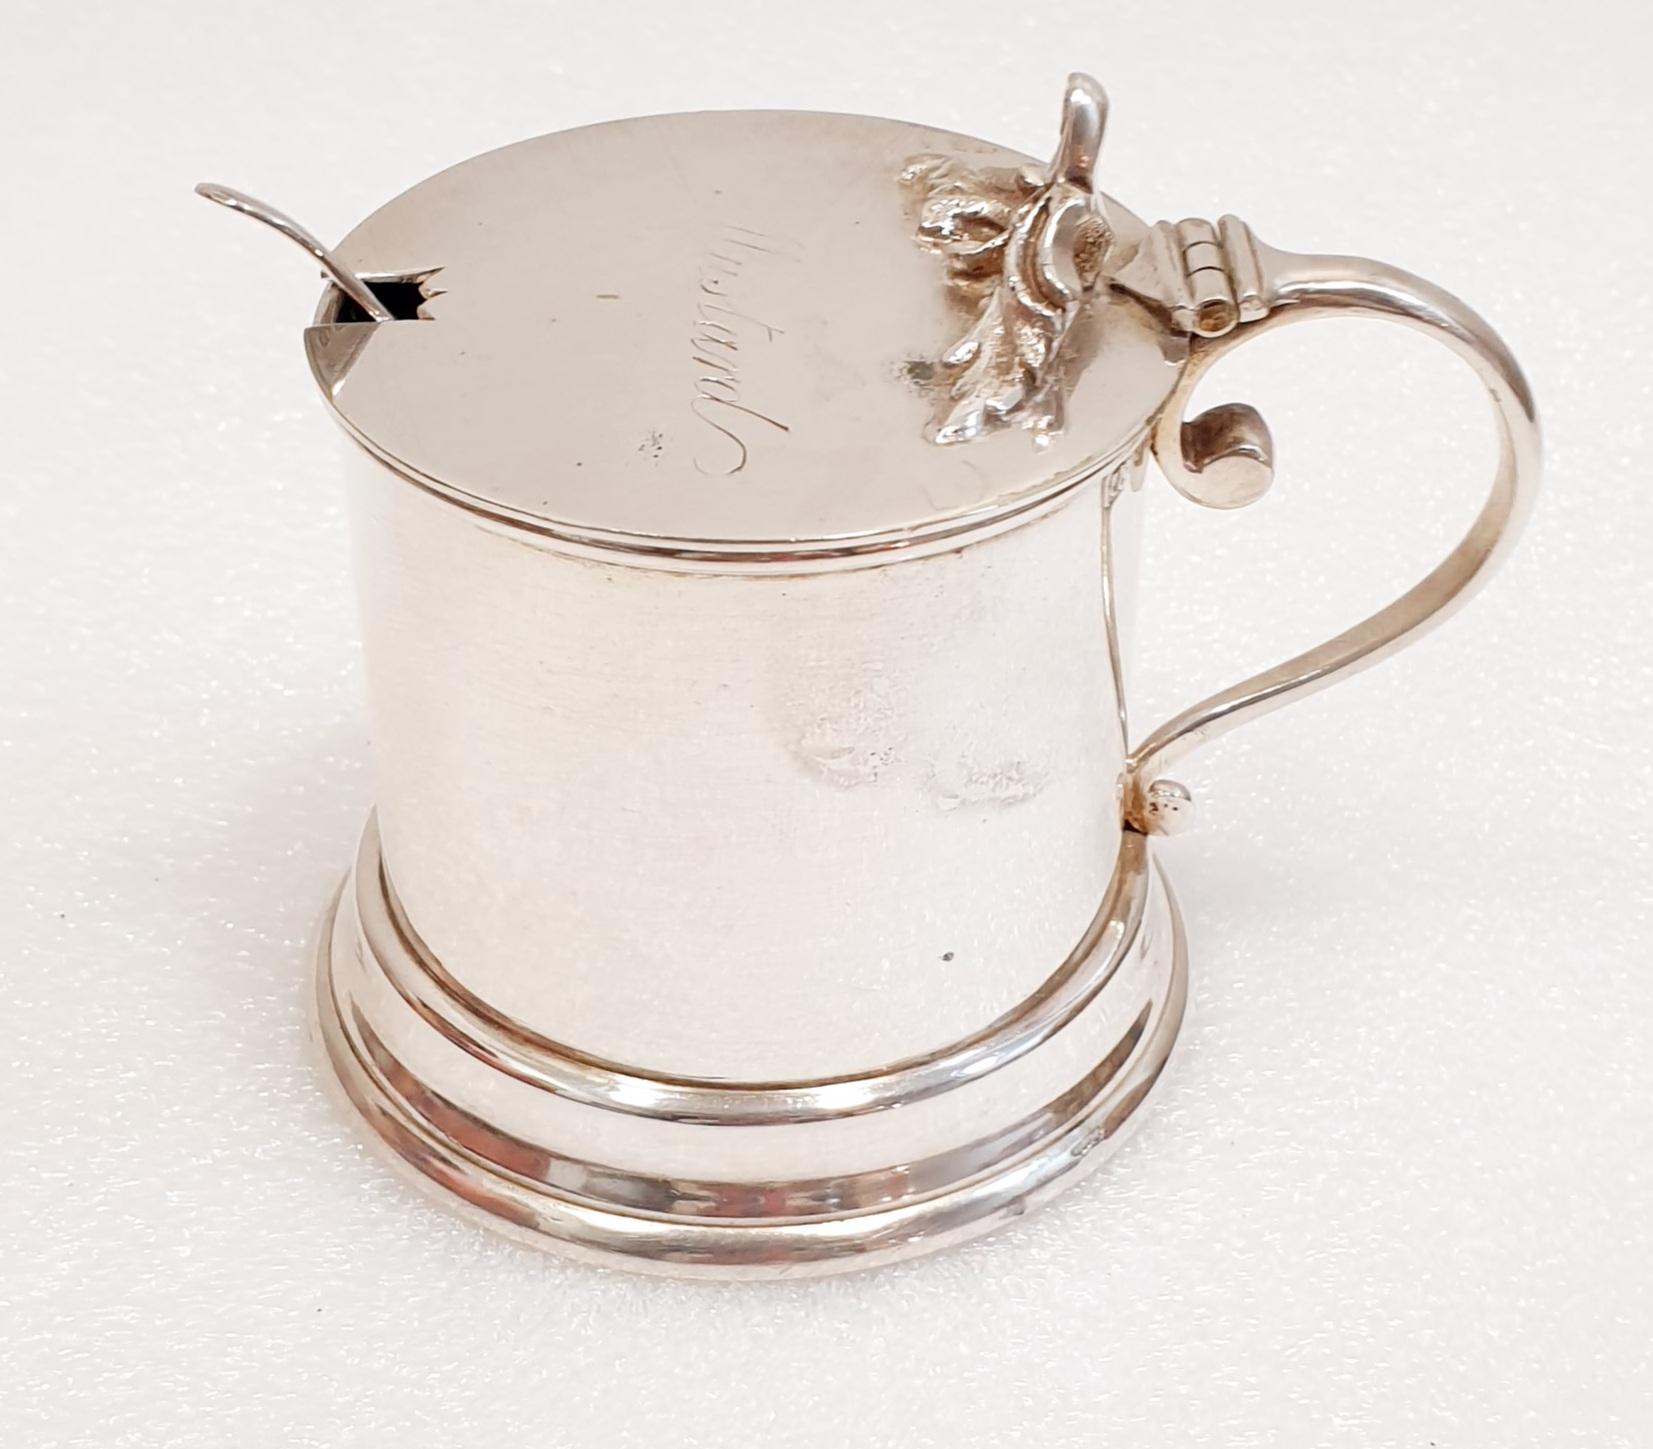 Silver mustard pot / Antique sterling sliver seasoning pot
Antique sterling silver mustard / glass lined seasoning pot 1919

Beautifully crafted antique mustard pot comprised of heavy weight handle with hinged lid (also stamped inside). The pot